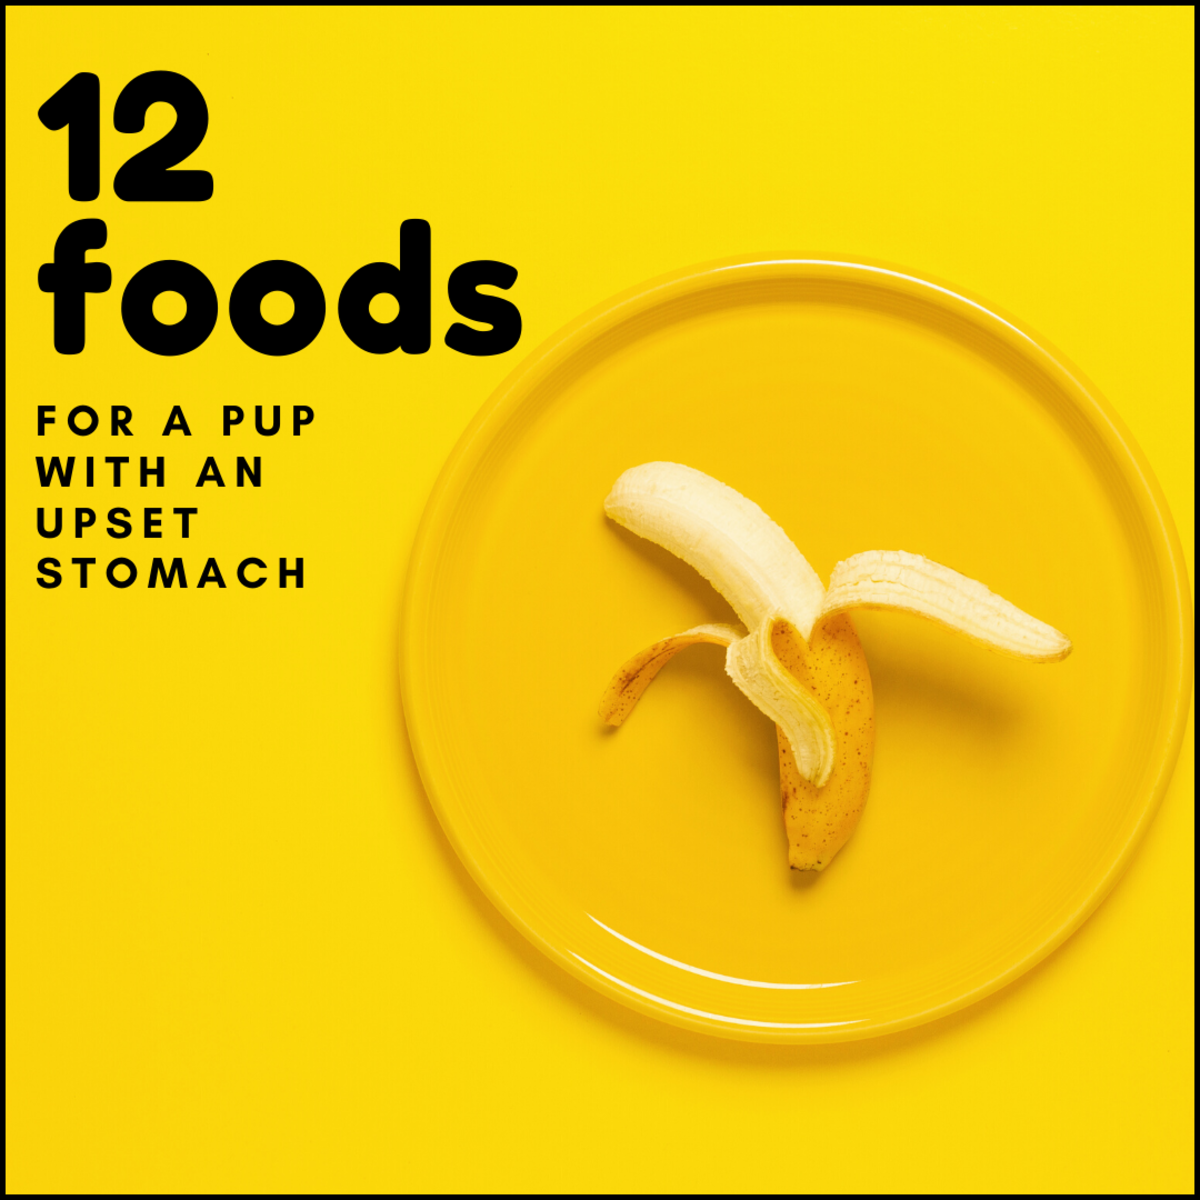 If your dog has an upset stomach, the following bland foods may help.